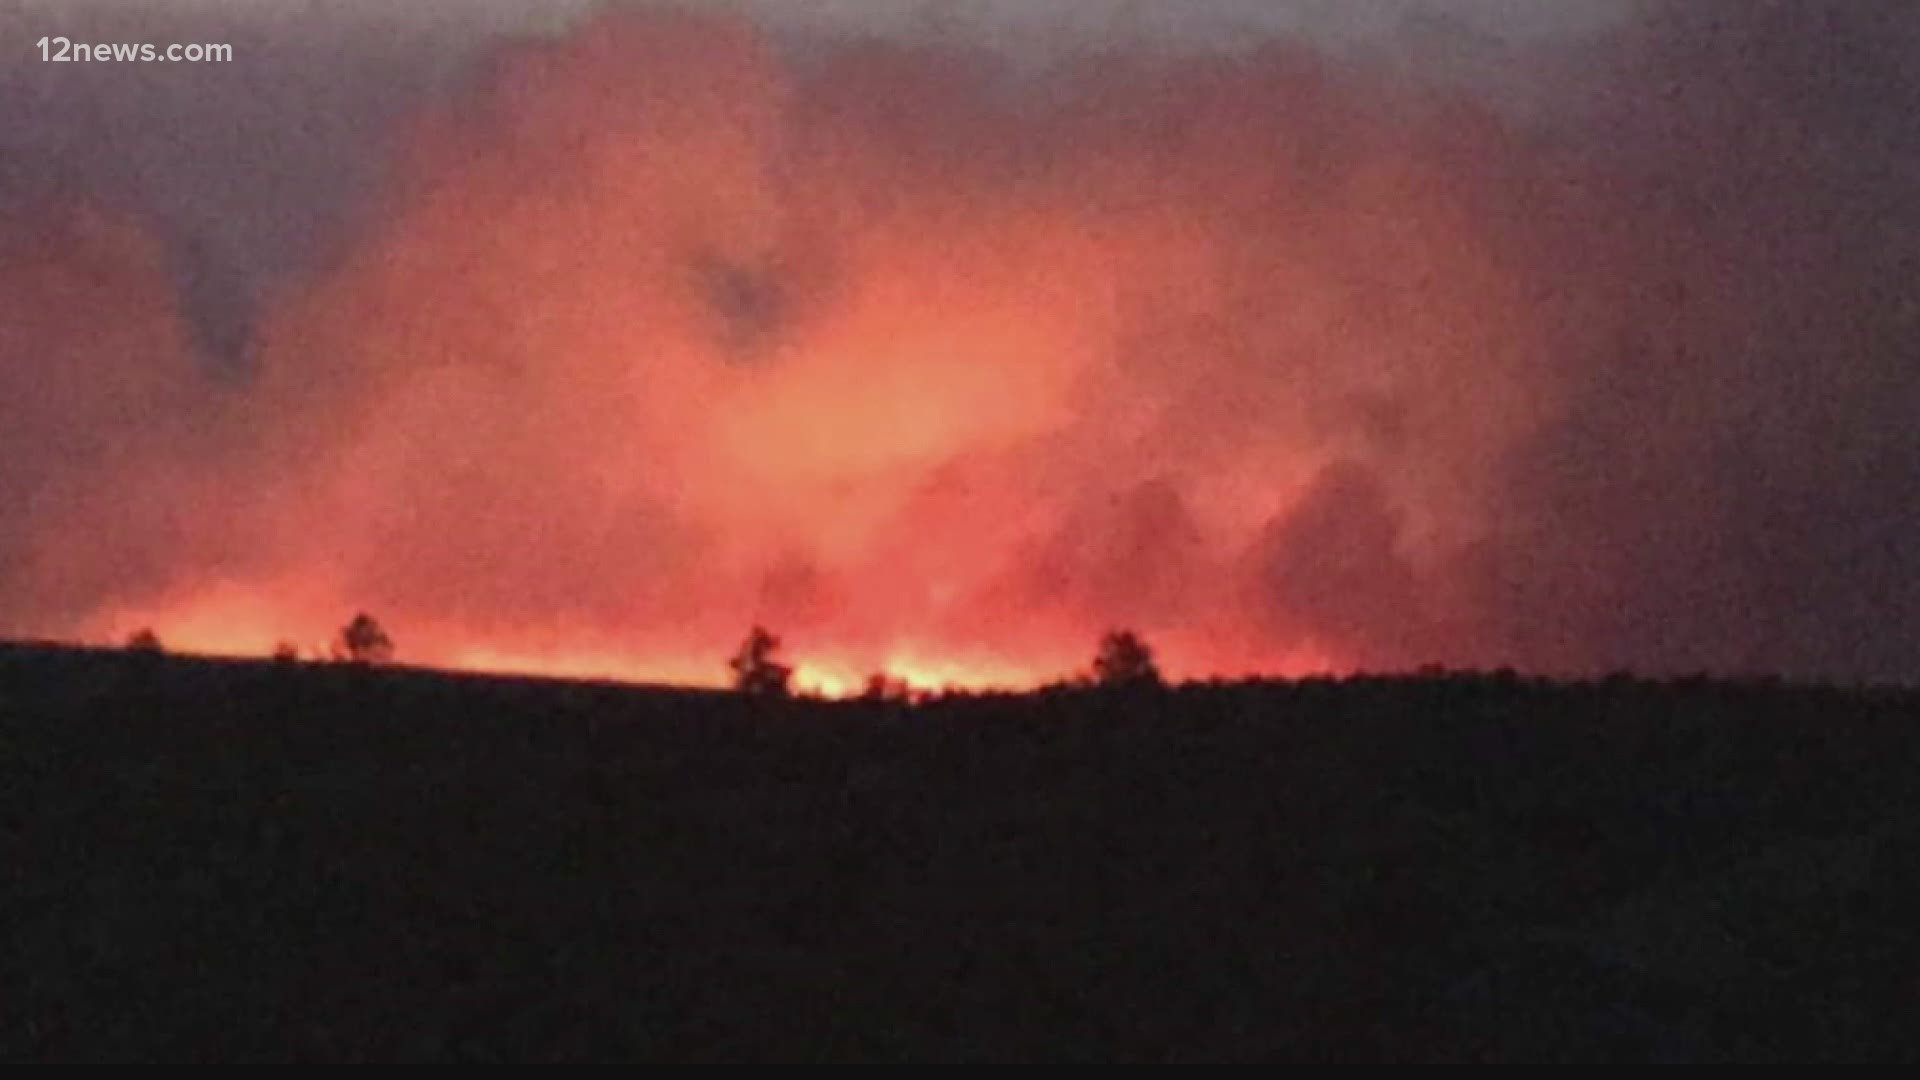 The Wyrick Fire is burning in Navajo County and has forced evacuations of ranchers and farmers living in Heber, Antelope Valley and Despain Ranch.